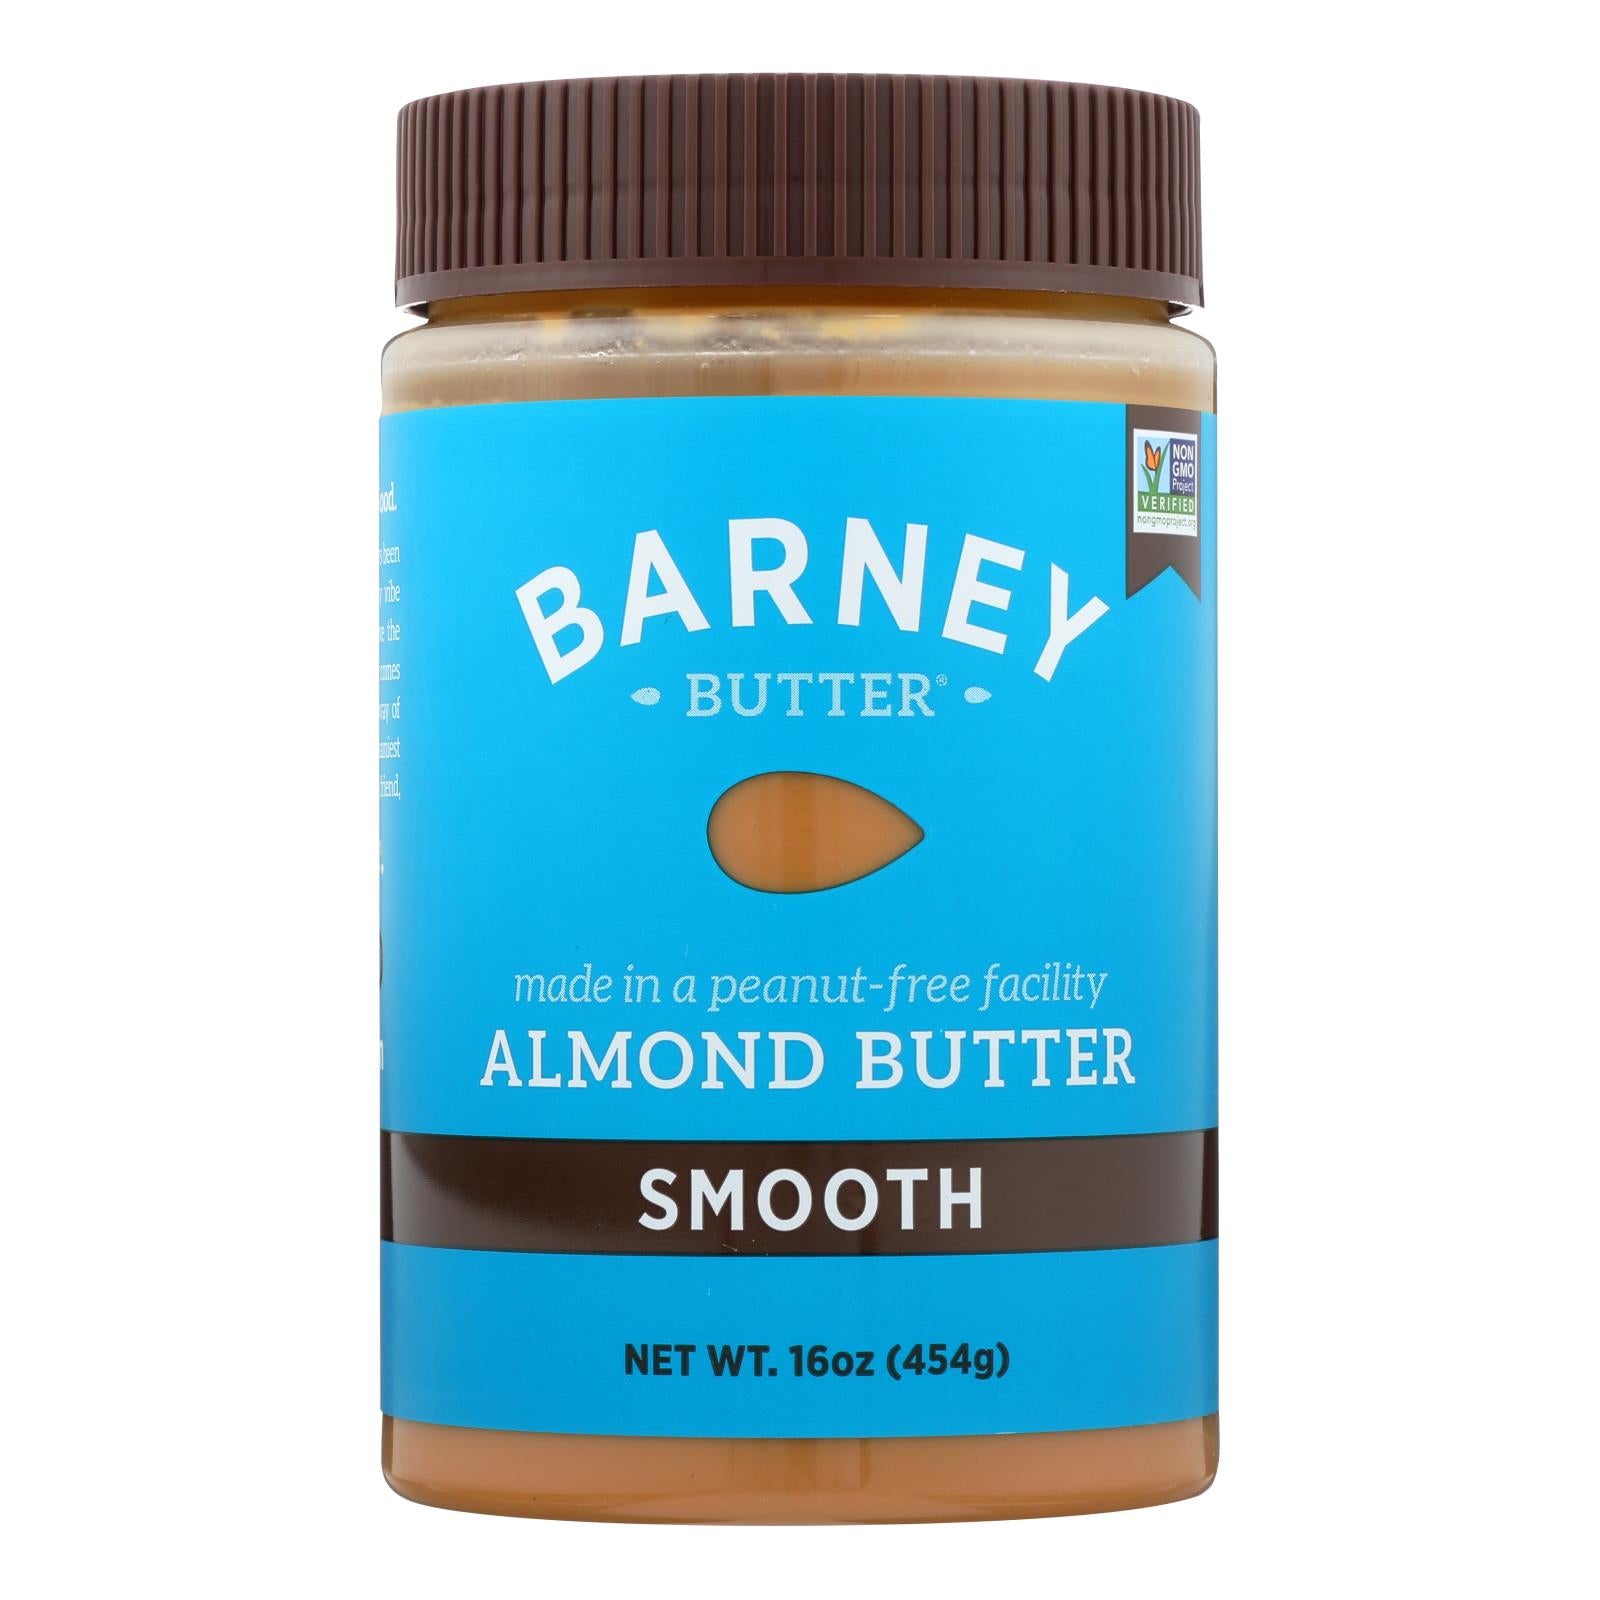 Barney Butter, Barney Butter - Almond Butter - Smooth - Case of 6 - 16 oz. (Pack of 6)